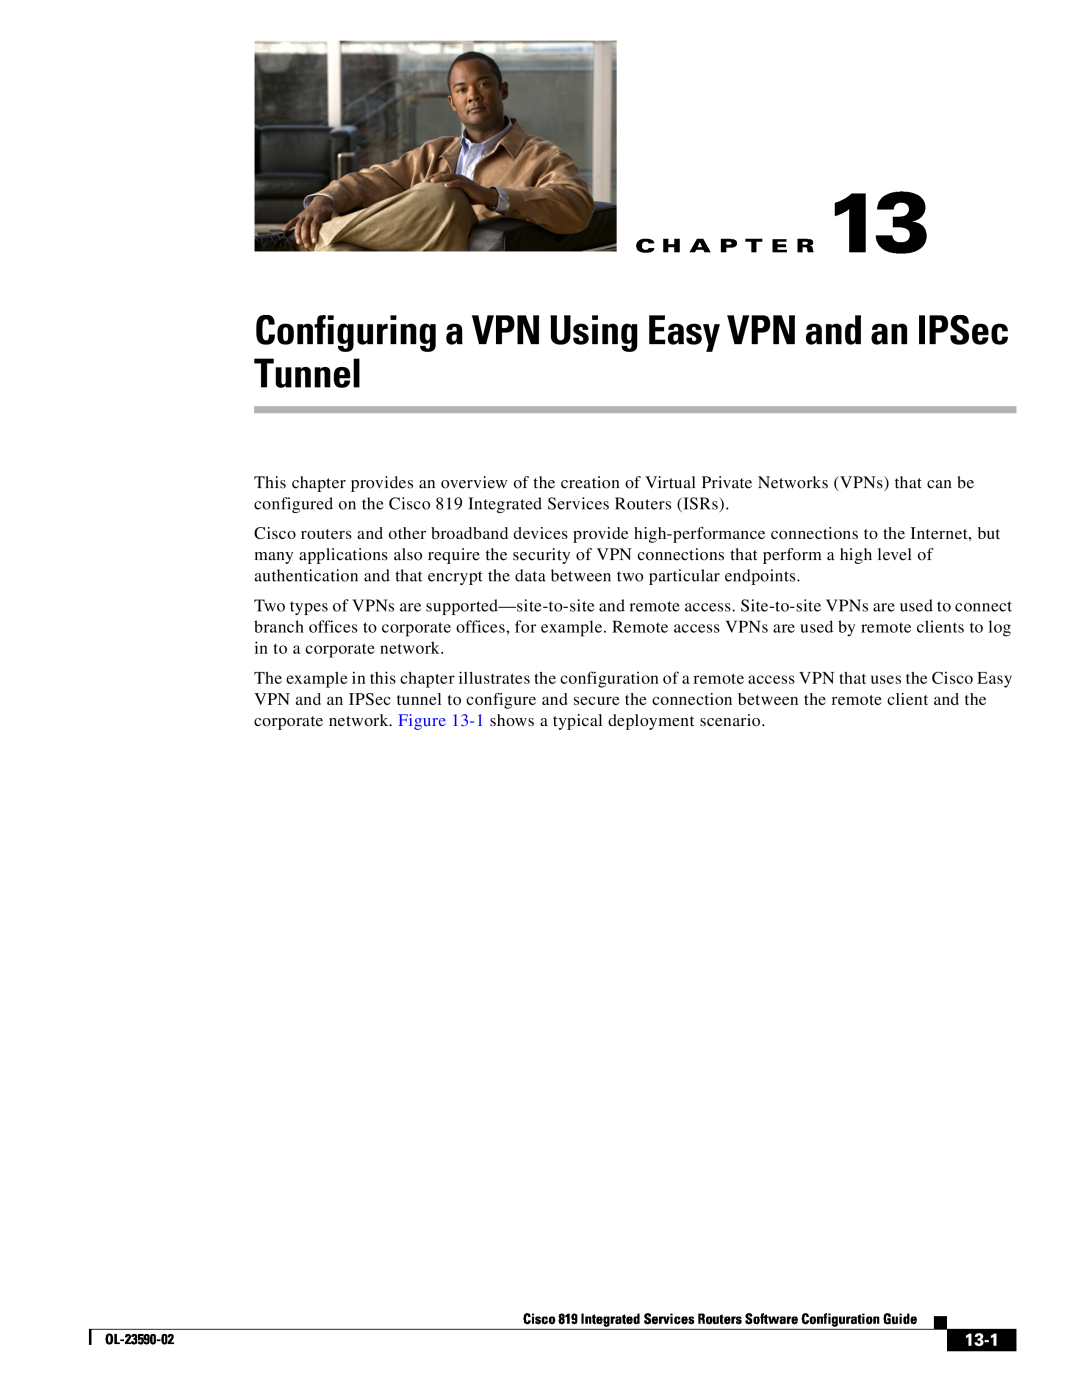 Cisco Systems C819HG4GVK9, C819GUK9 manual Configuring a VPN Using Easy VPN and an IPSec Tunnel, 13-1, C H A P T E R 